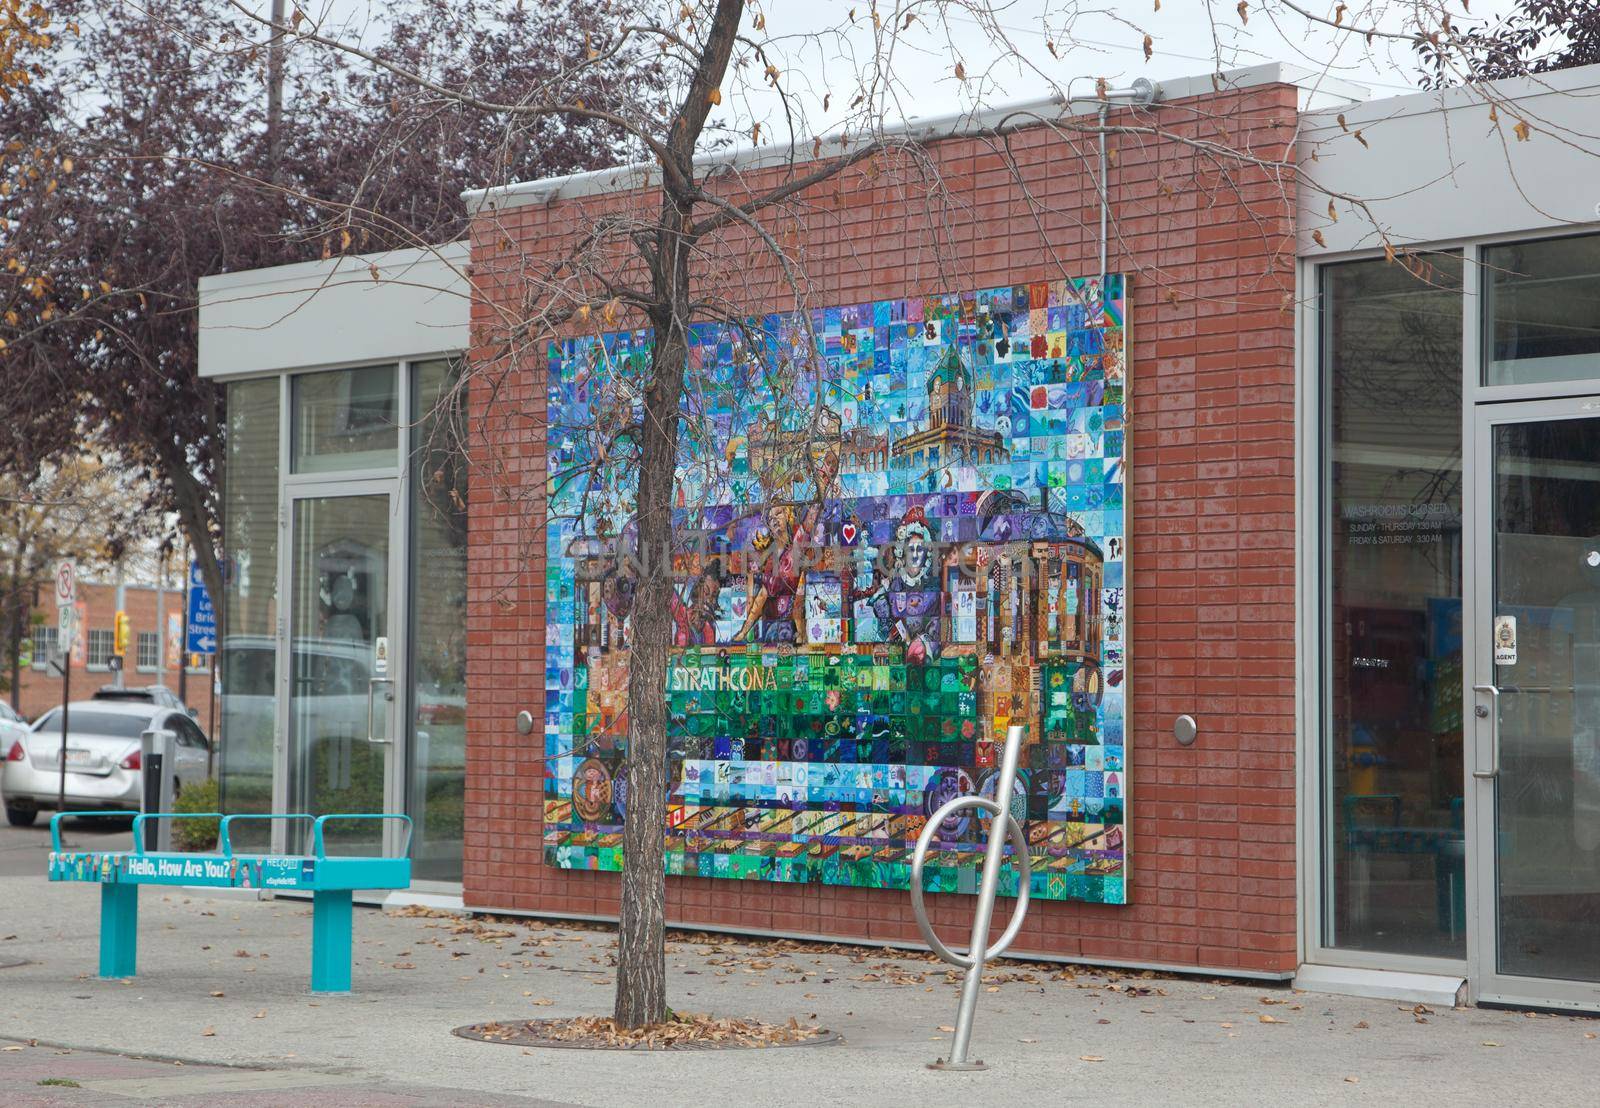 the city of Edmonton's colorful public washrooms and bench in the Strathcona district on the corner of Whyte and Gateway 